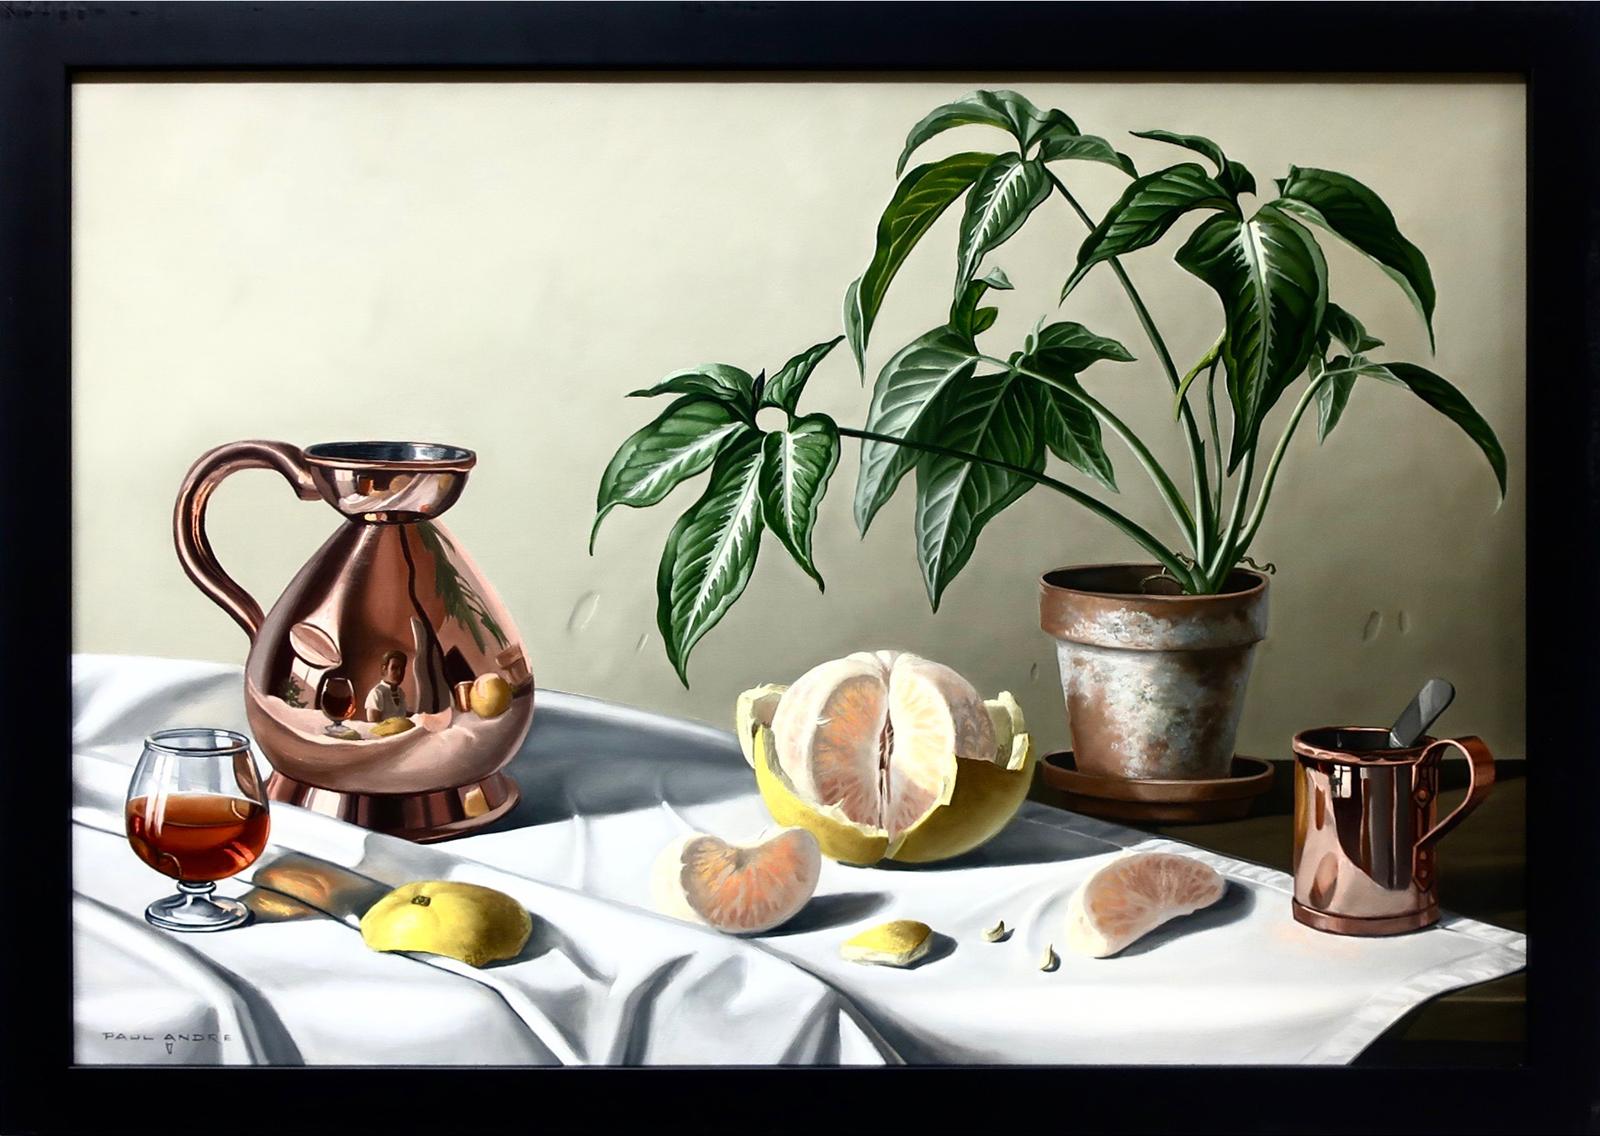 Seemee Kanayuk (1938) - Still Life With Grapefruit, Wine, Plant And Copper Ware